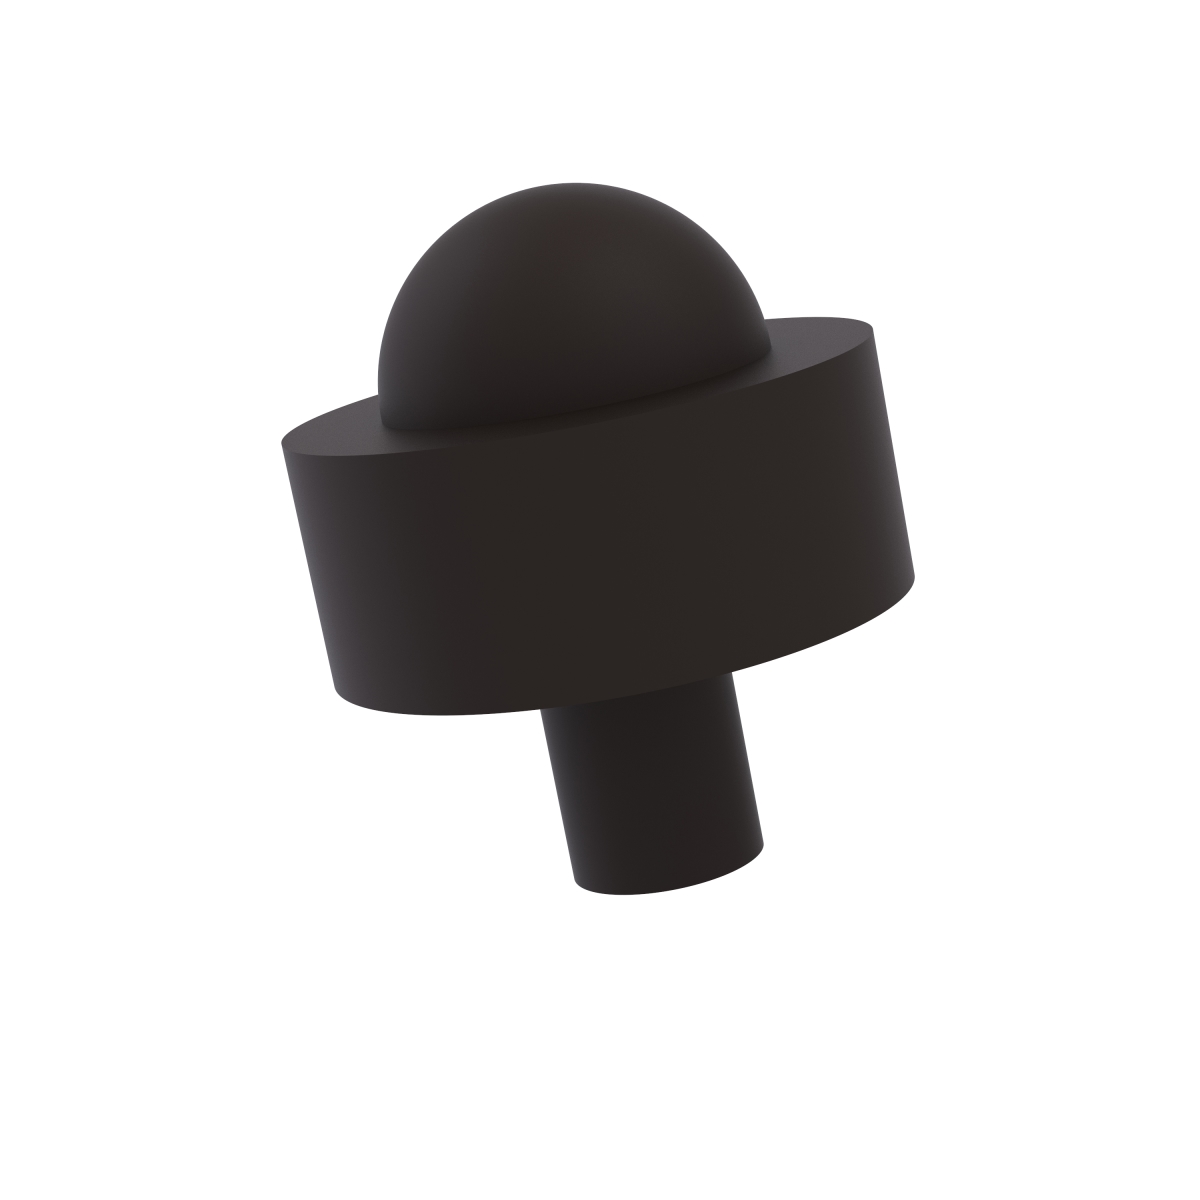 101a-orb 1.5 X 1.5 In. Cabinet Knob With Smooth Ring Style, Oil Rubbed Bronze